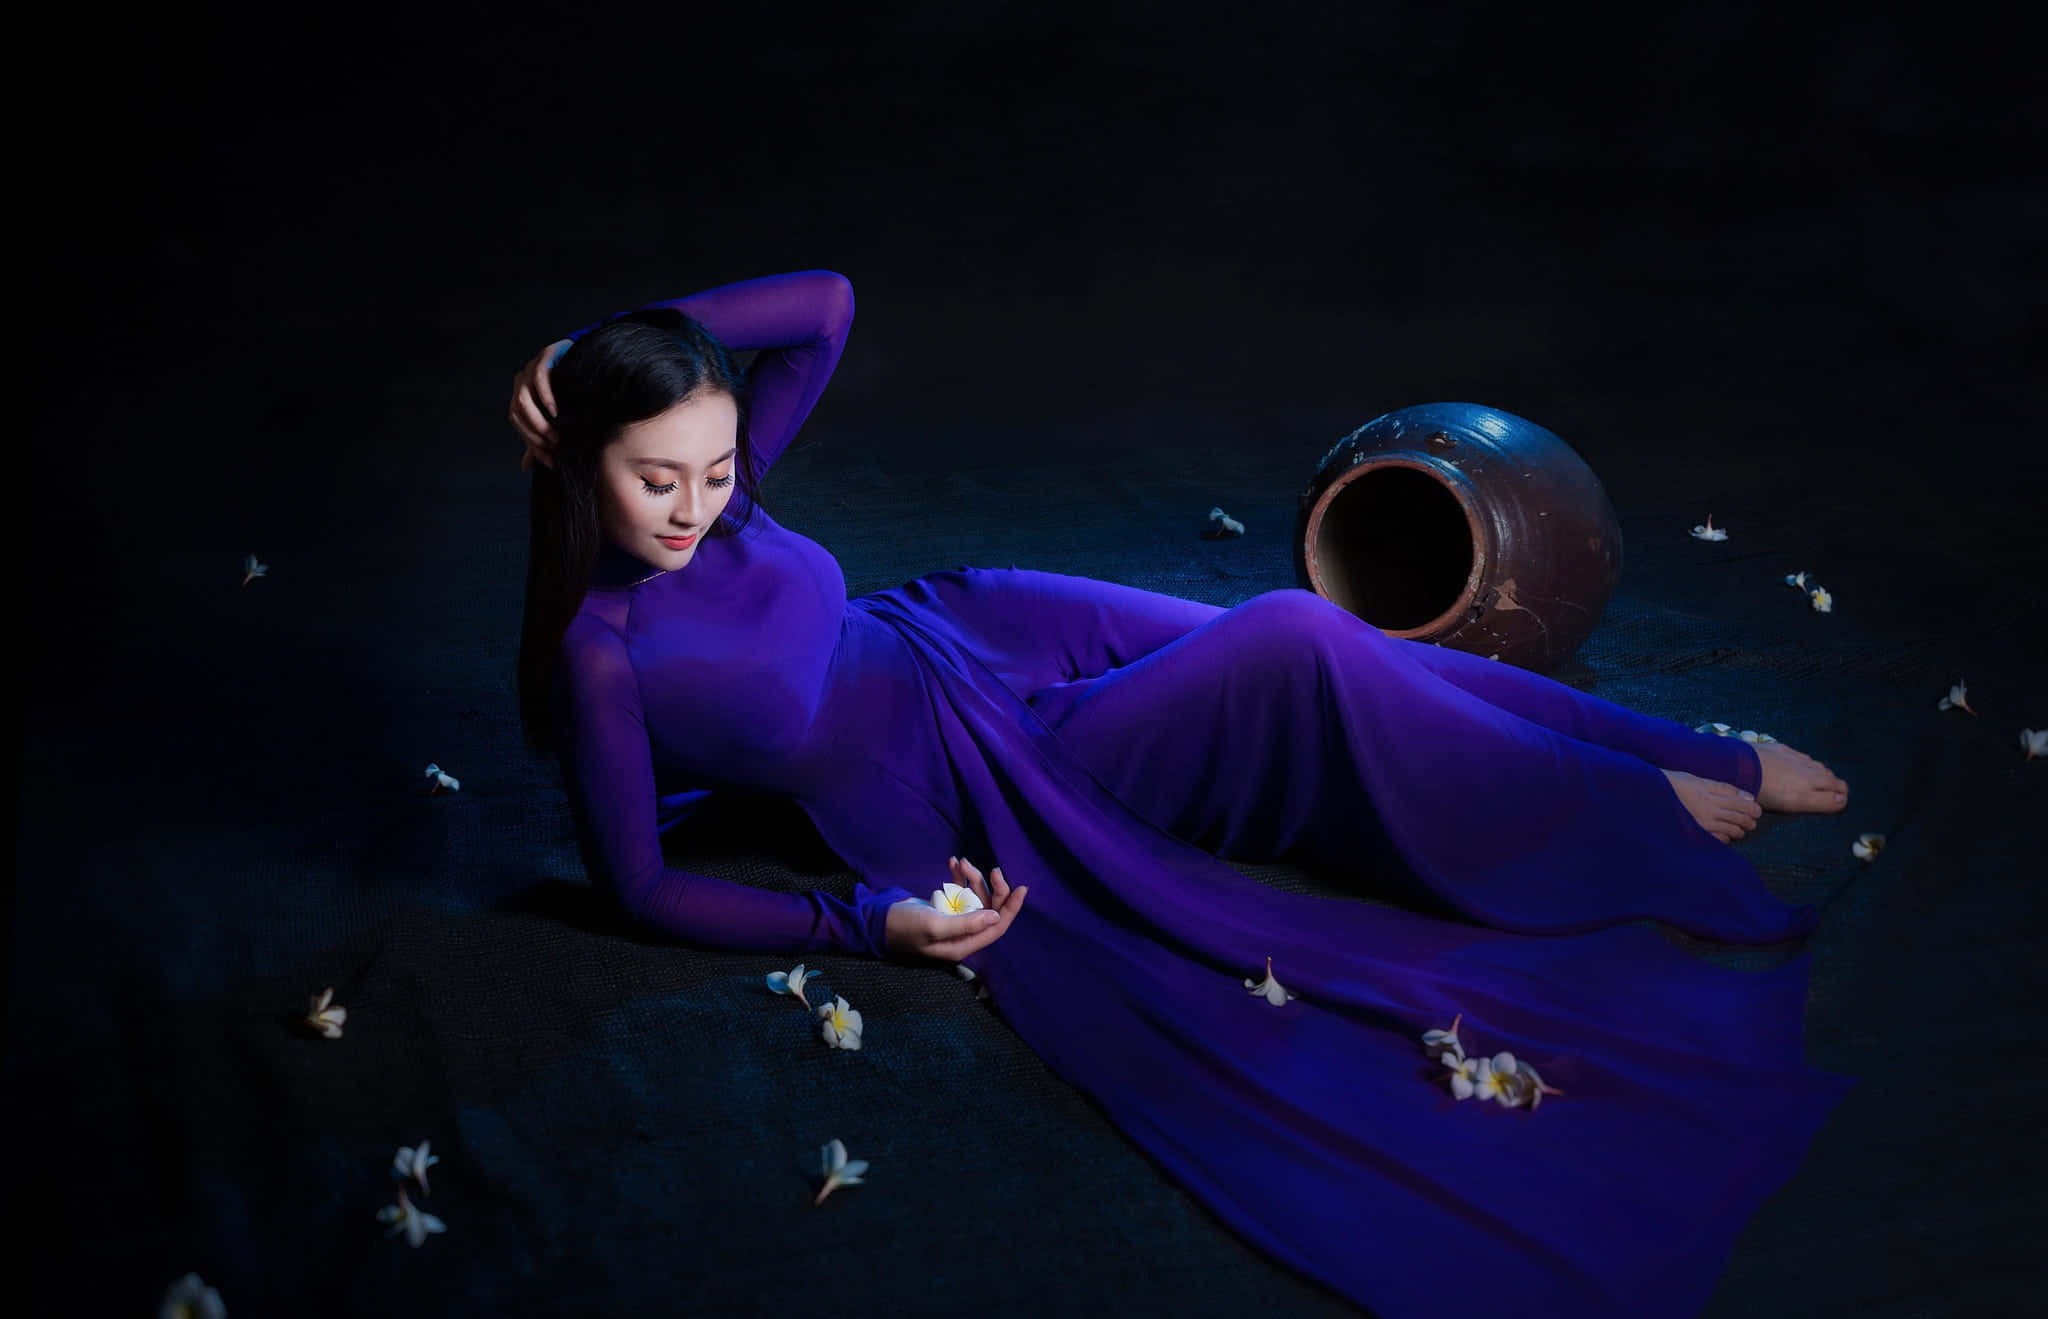 Shine in Our Gorgeous Purple Dress Wallpaper